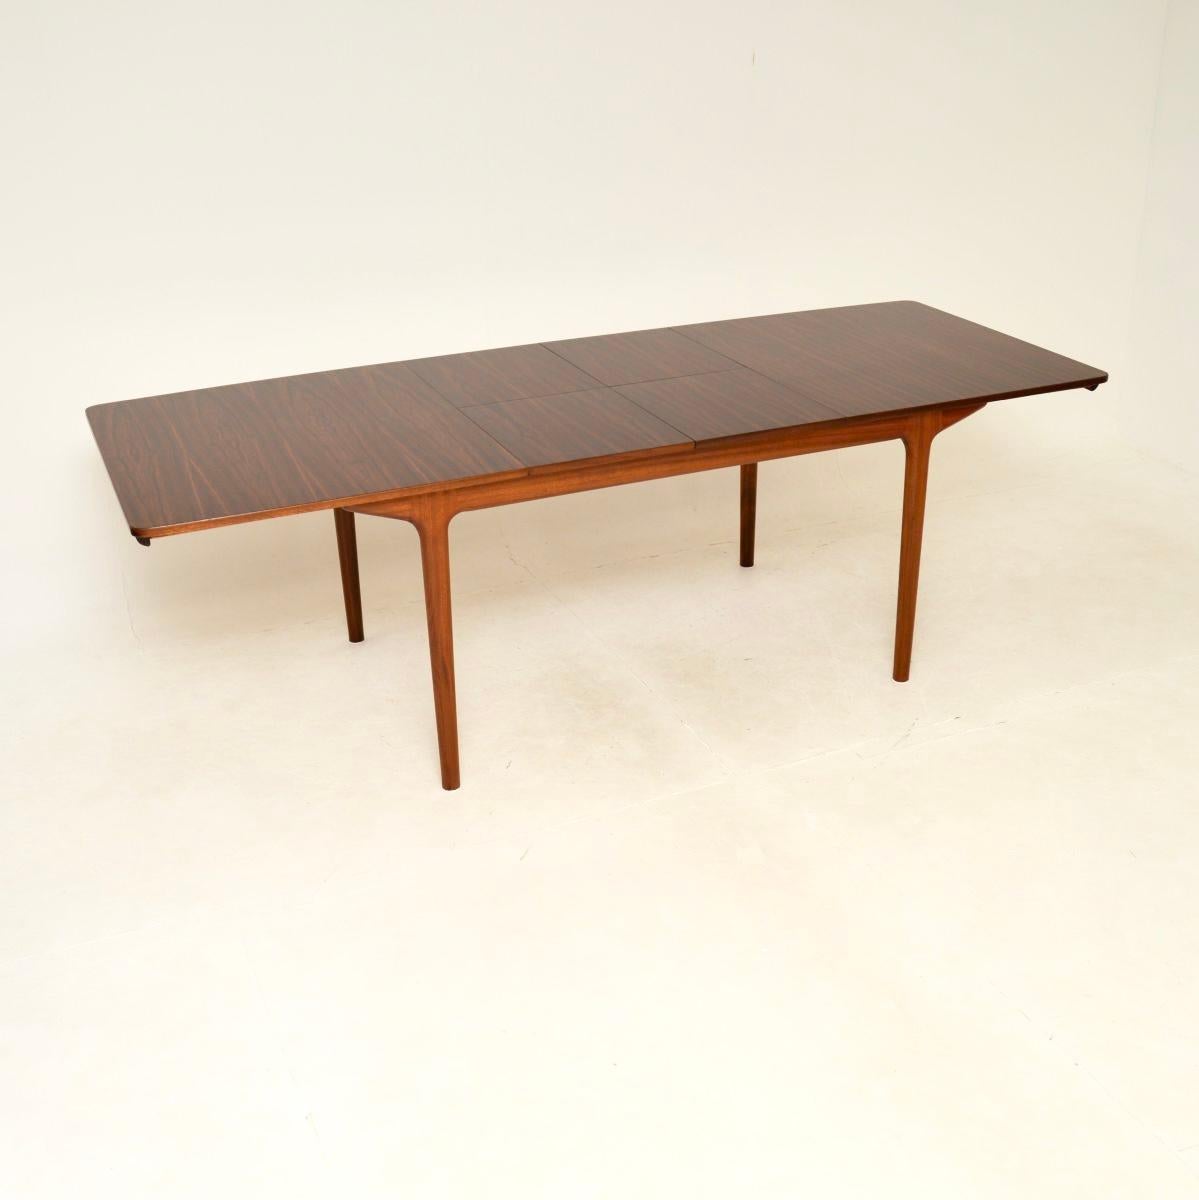 A stylish and extremely well made vintage extending dining table by McIntosh. This was made in Scotland, it was designed by Tom Robertson and dates from the 1960’s.

It is of superb quality, the top has stunning grain patterns and sits on a solid